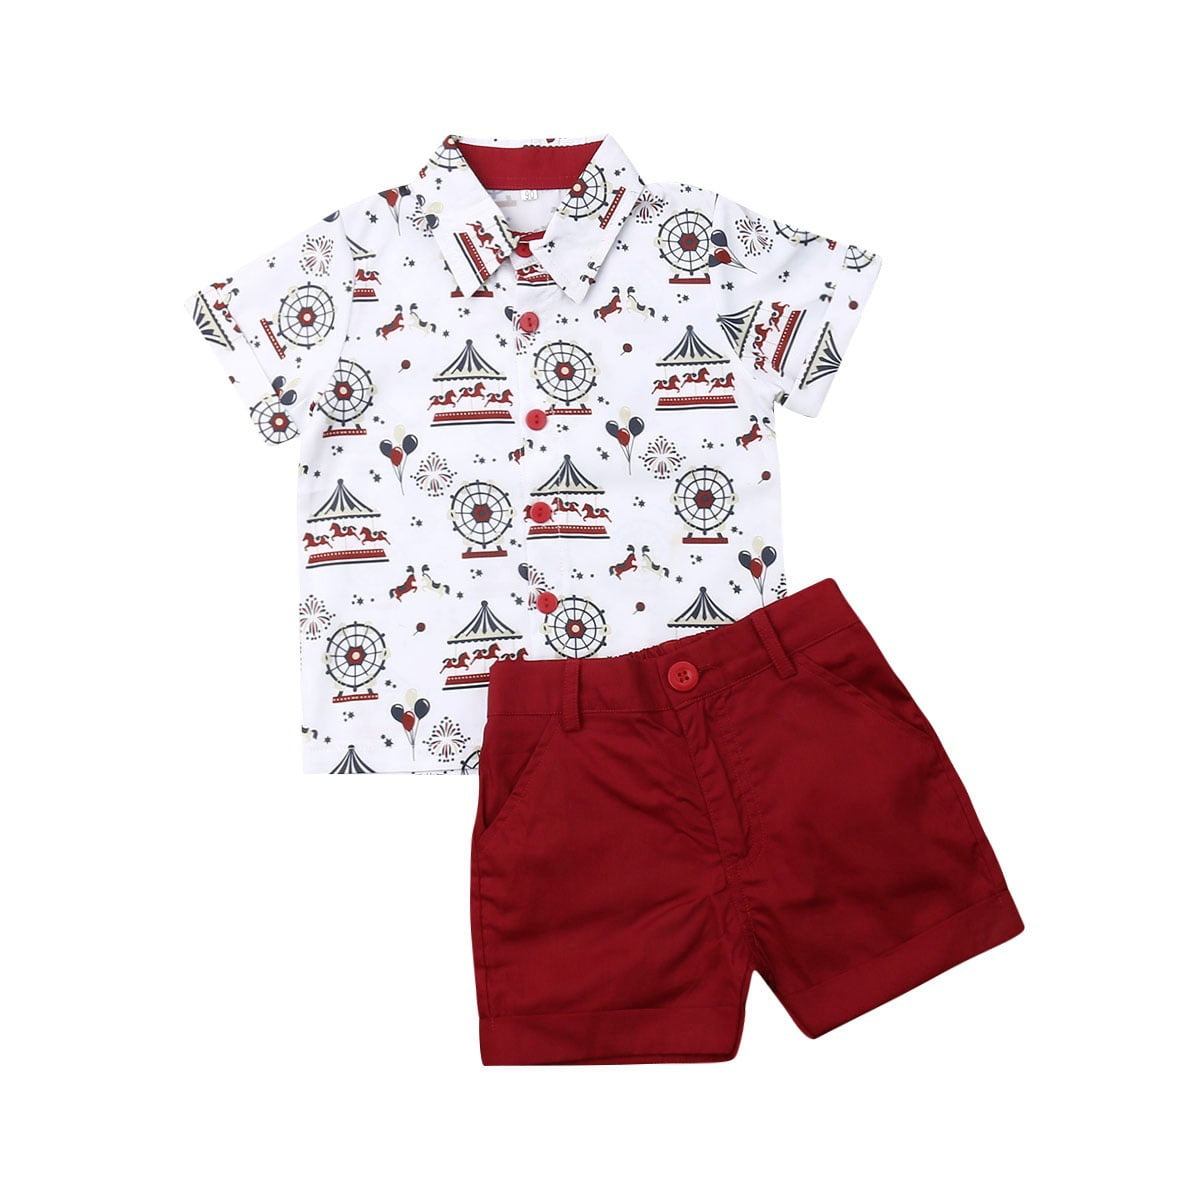 Infant Baby Kids Boys Summer Clothes Set Print T-shirt Tops+Solid Shorts Outfits 